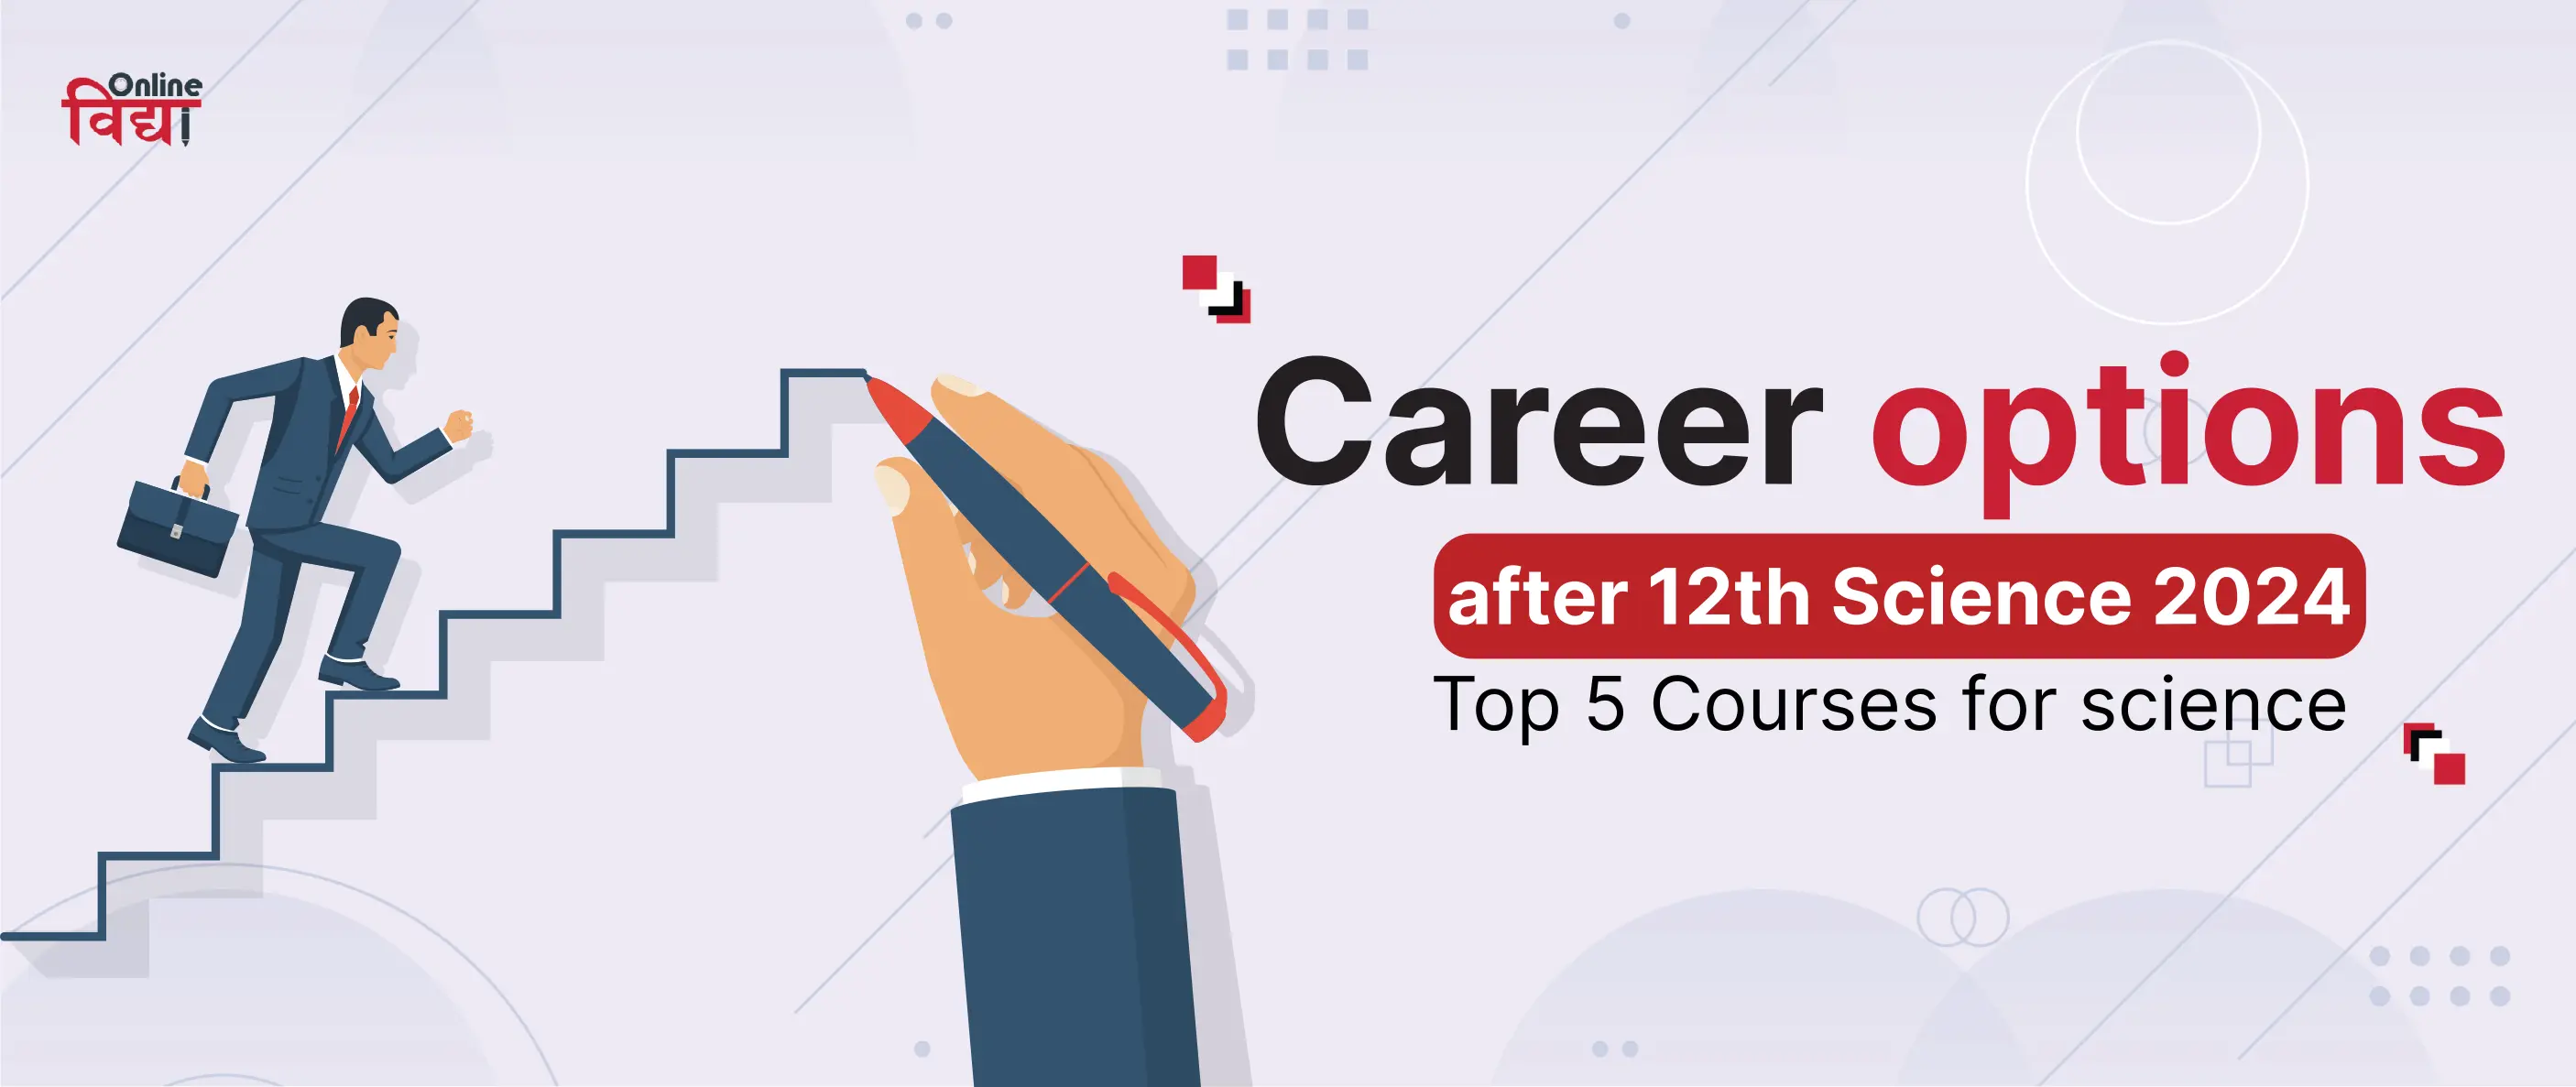 Career options after 12th Science 2024- Top 5 Courses for Science